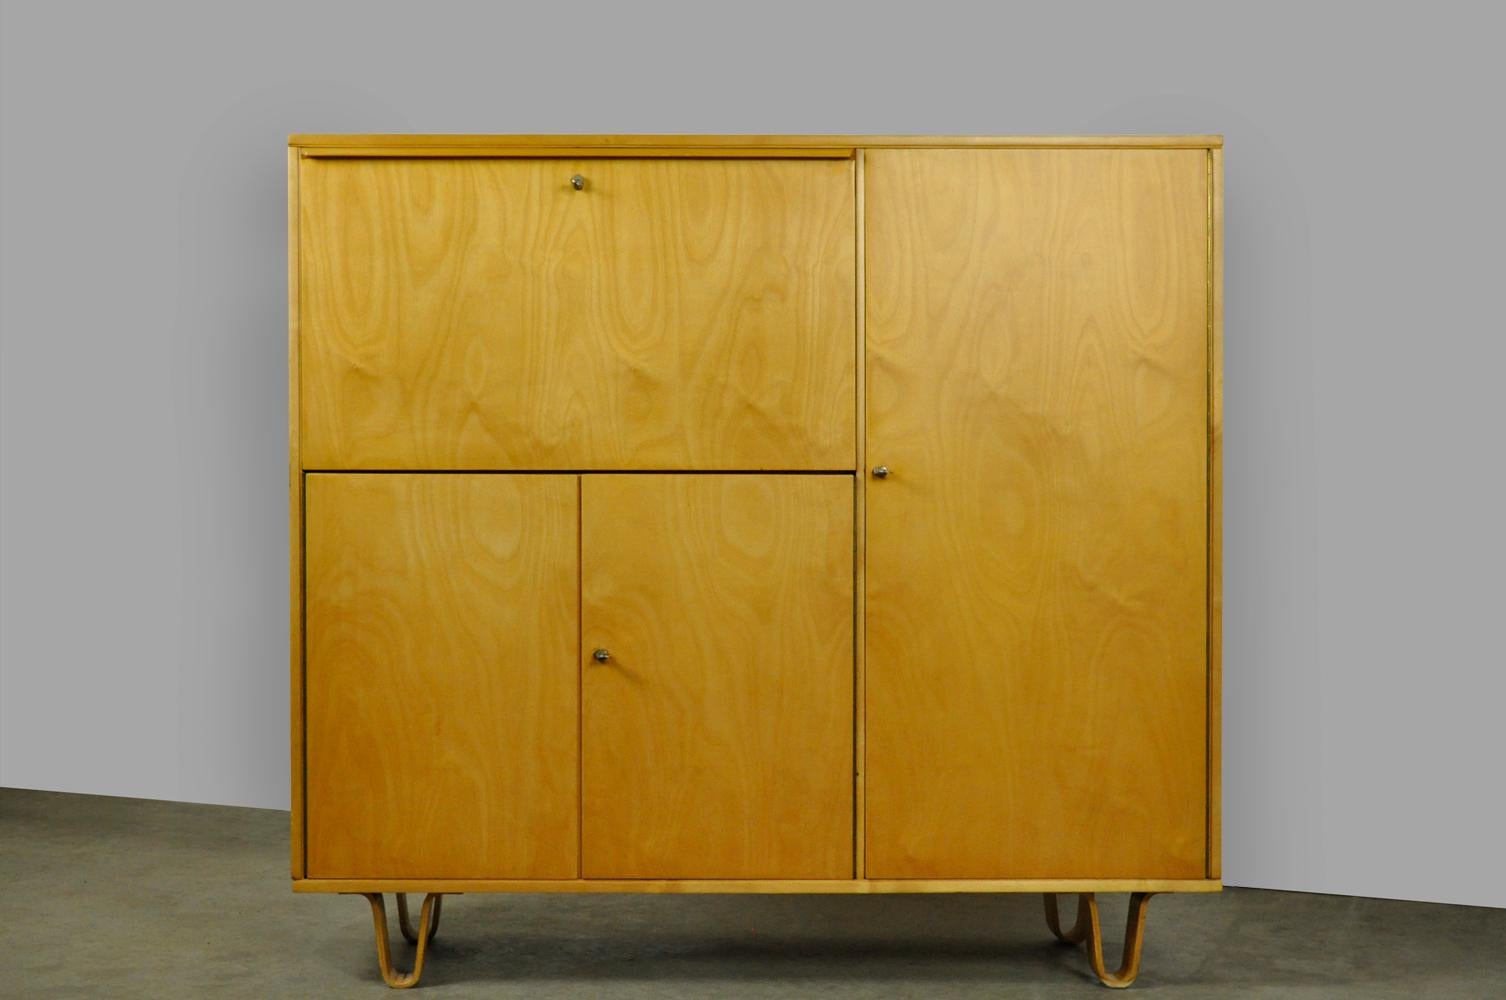 Vintage birch series sideboard CB01, designed by Cees Braakman for Pastoe, 1950s. The cabinet from the Birch series has a birch veneer finish, stands on the characteristic plywood loop legs and has the well-known anti-dust drawers. The vintage